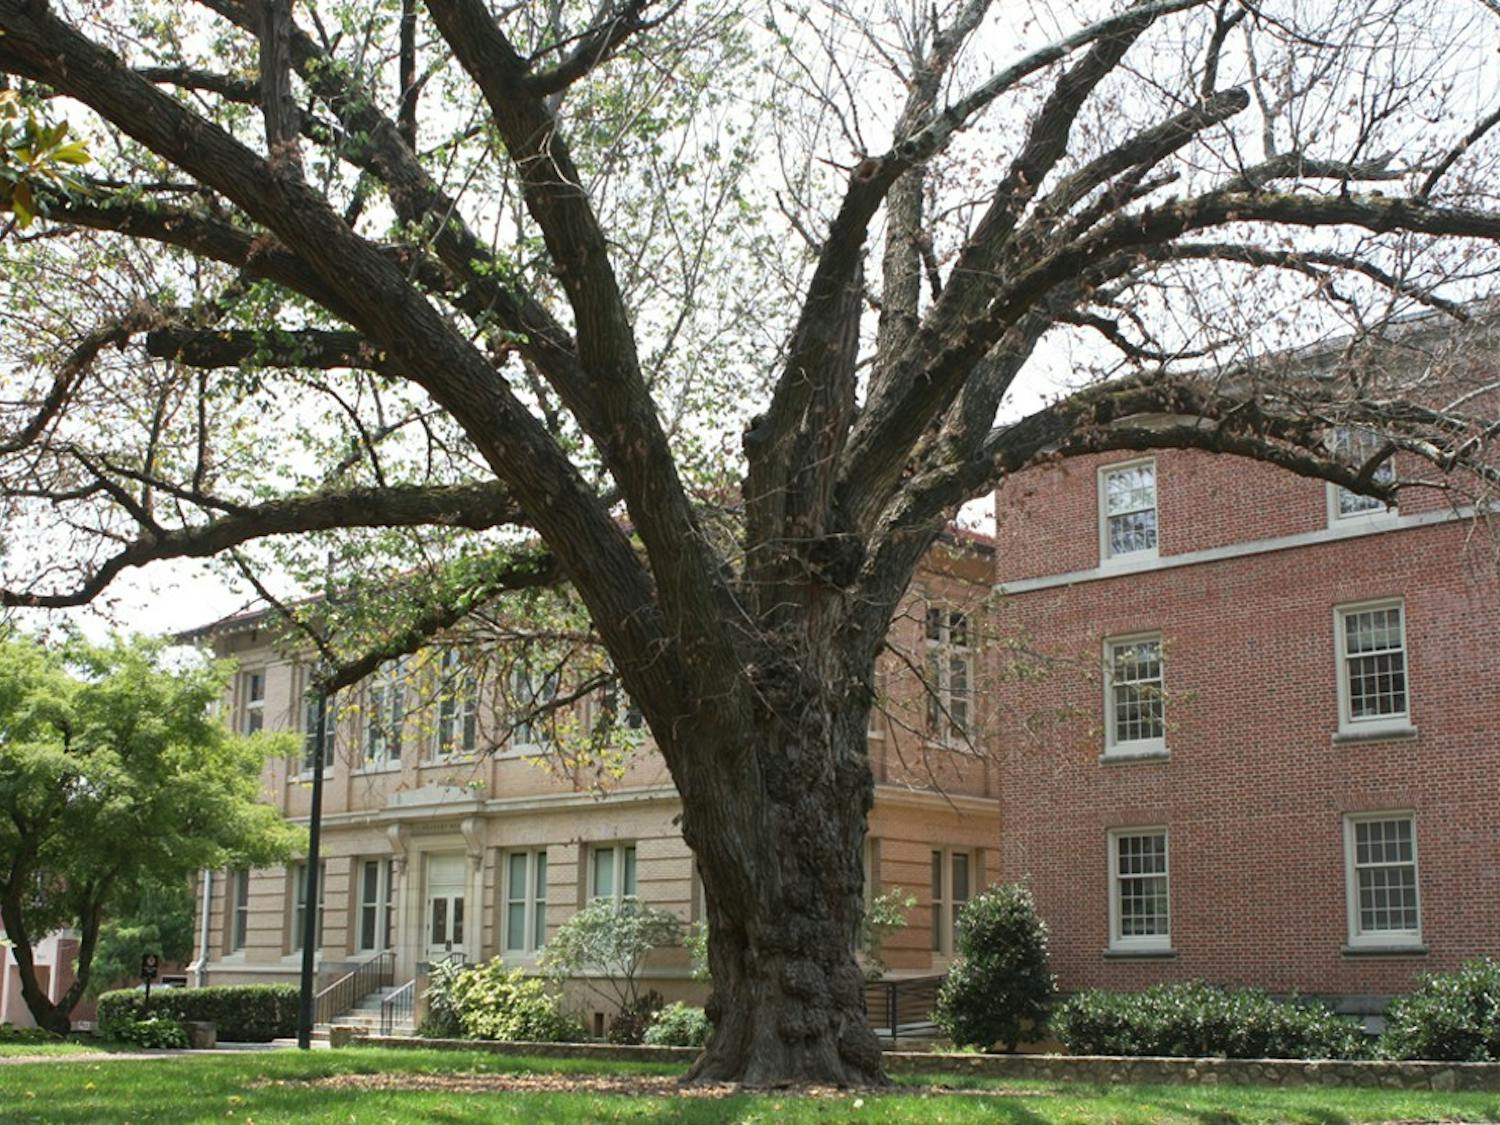 Photo: UNC’s ‘oldest elm tree’ cut down due to disease, insects (Erin Hull)